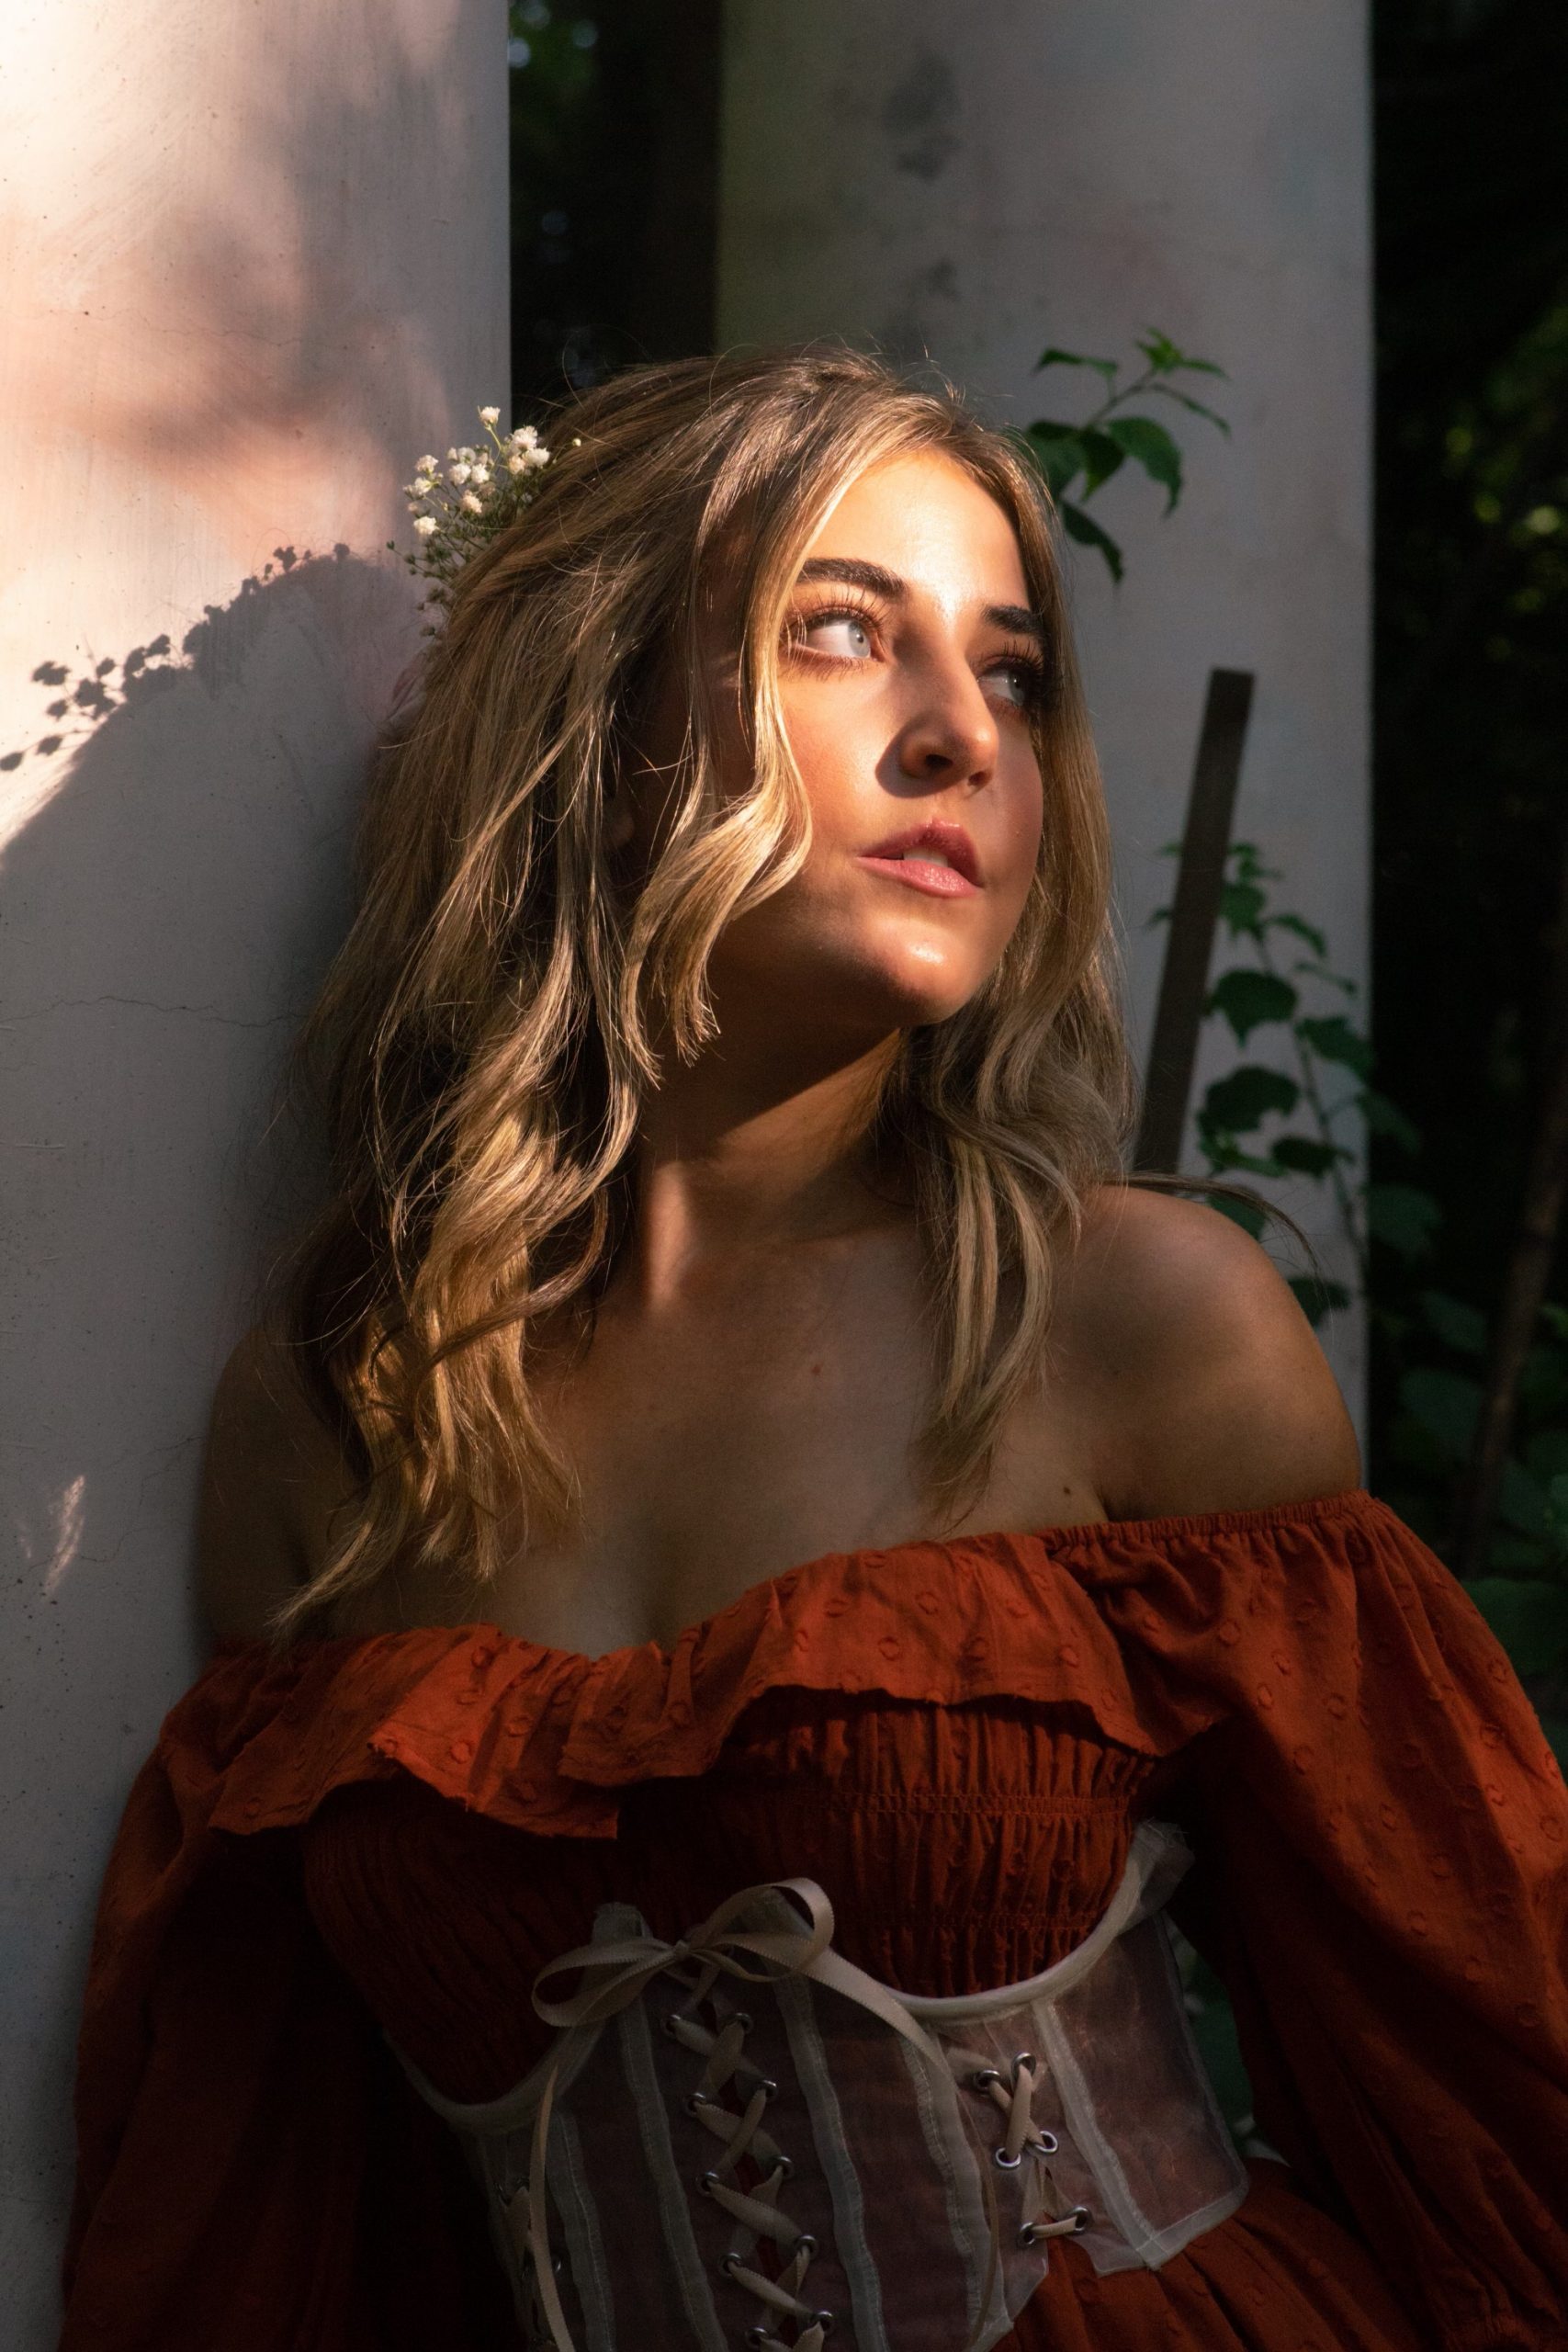 ‘Daydreaming’ is an infectious pop record that features Logan Alexandra’s dynamic vocals